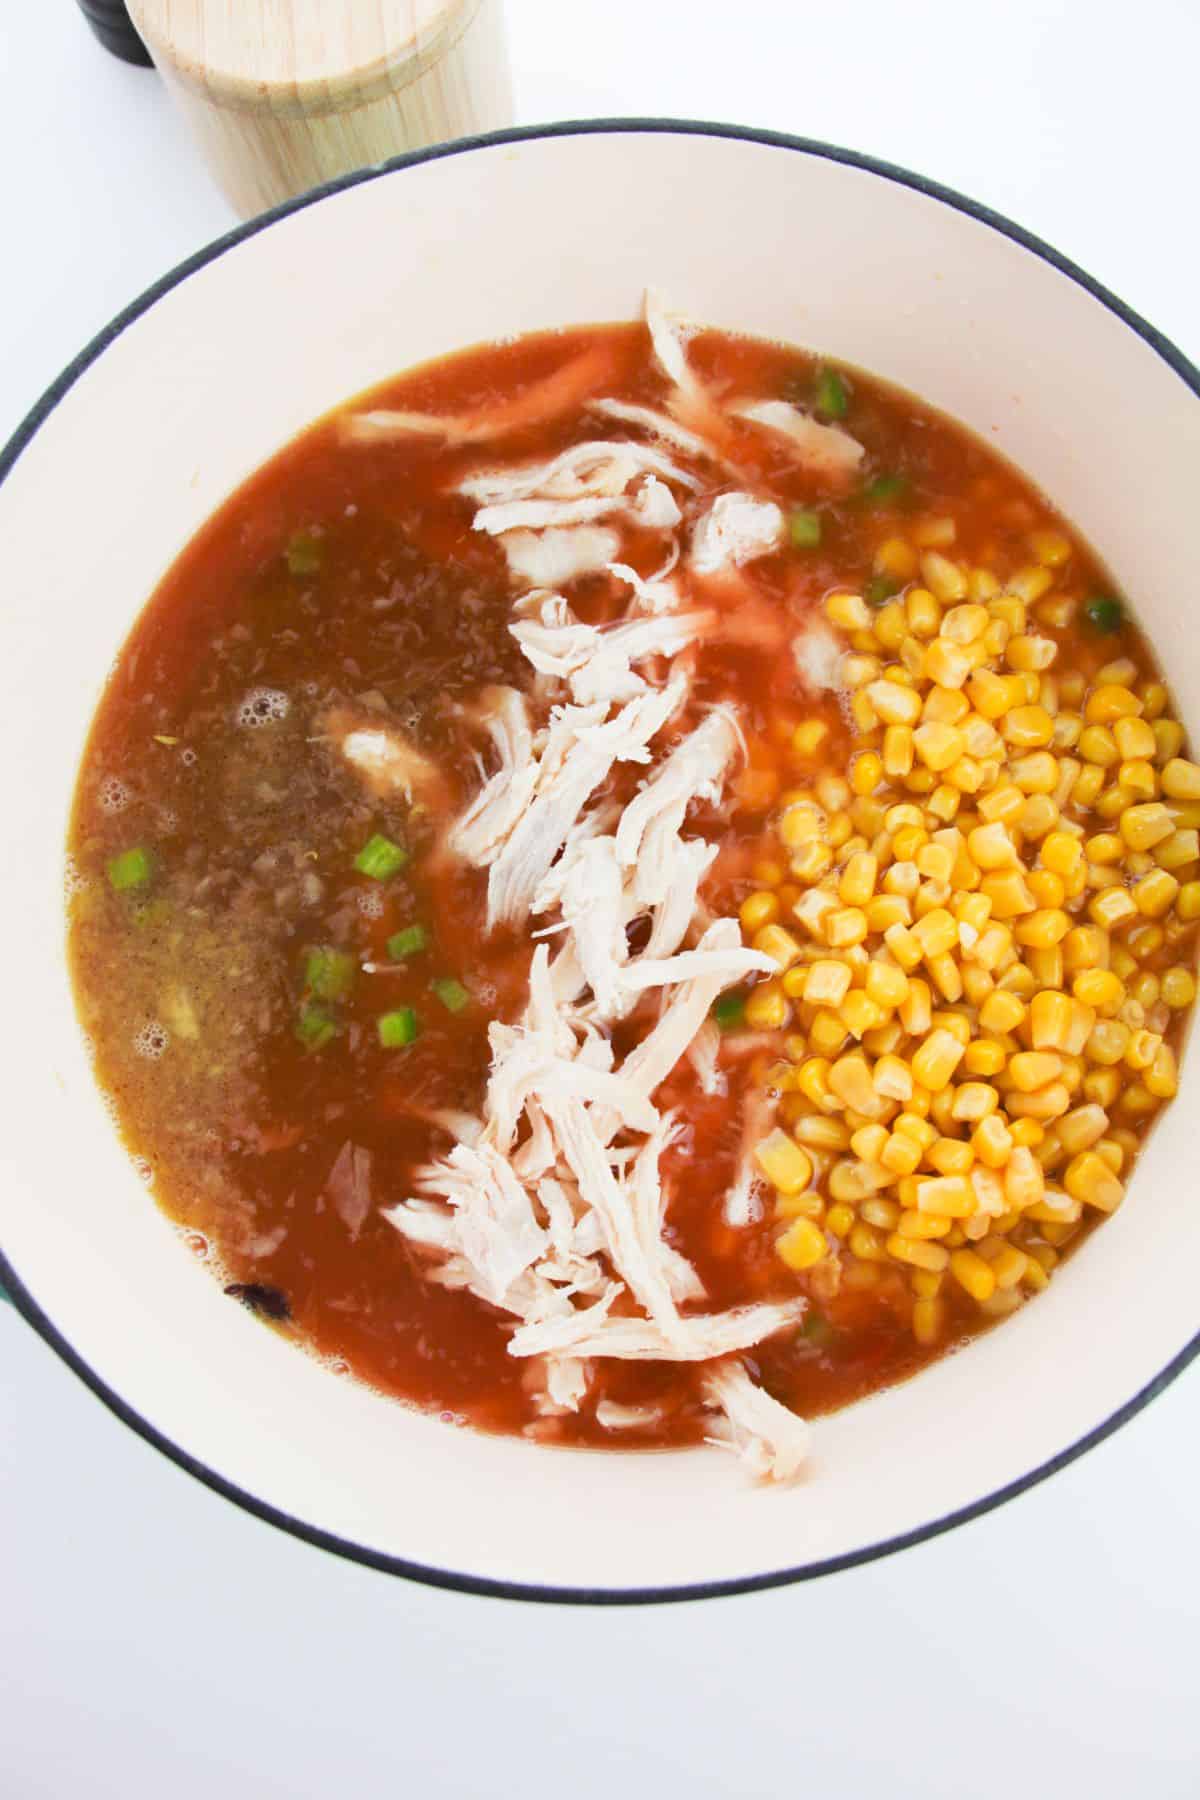 The chicken, corn, black beans, and seasonings are added to the soup mixture.